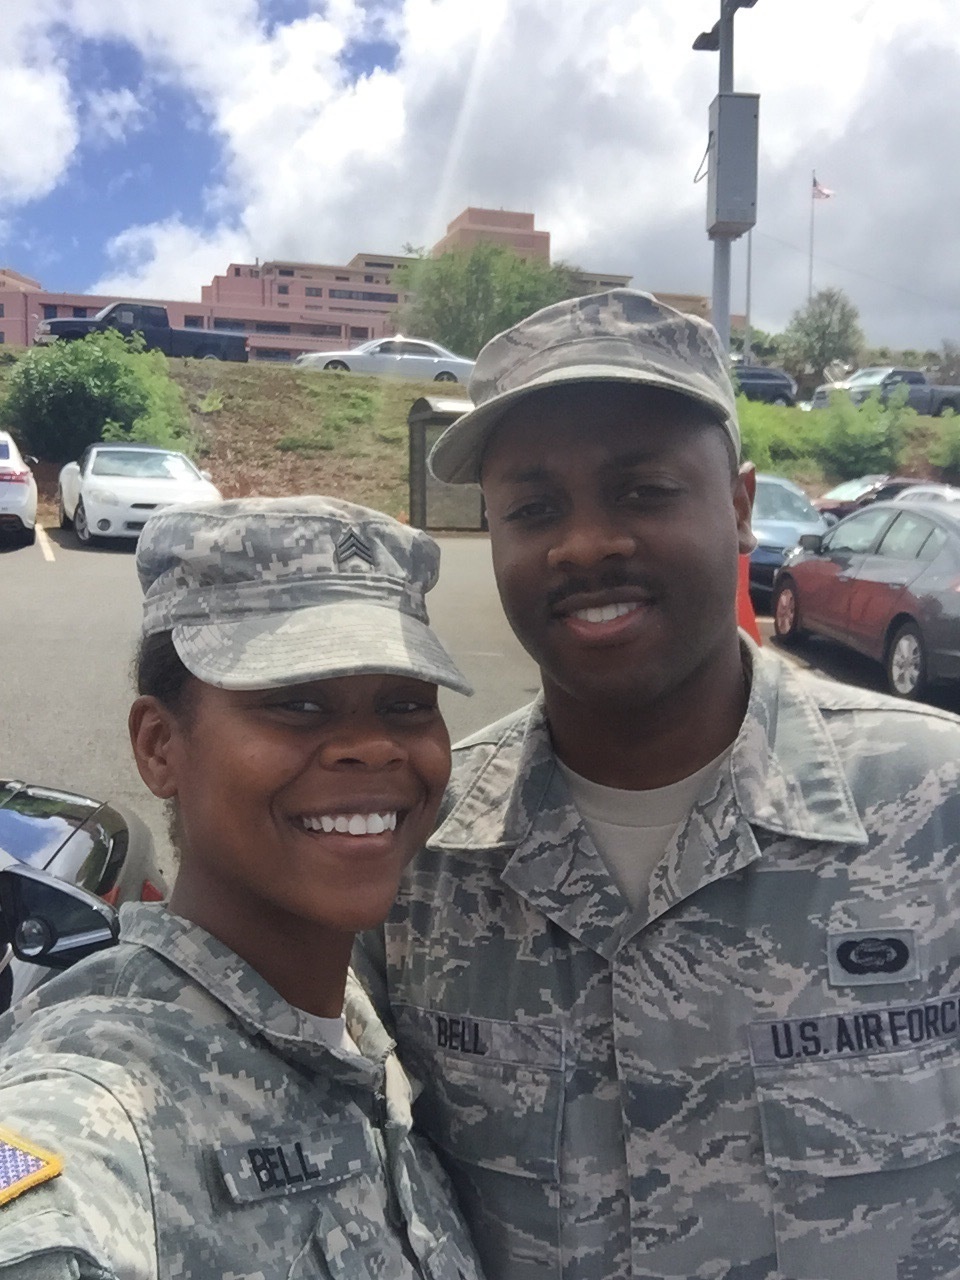 Arizona recruiter finds adventure and opportunity through service